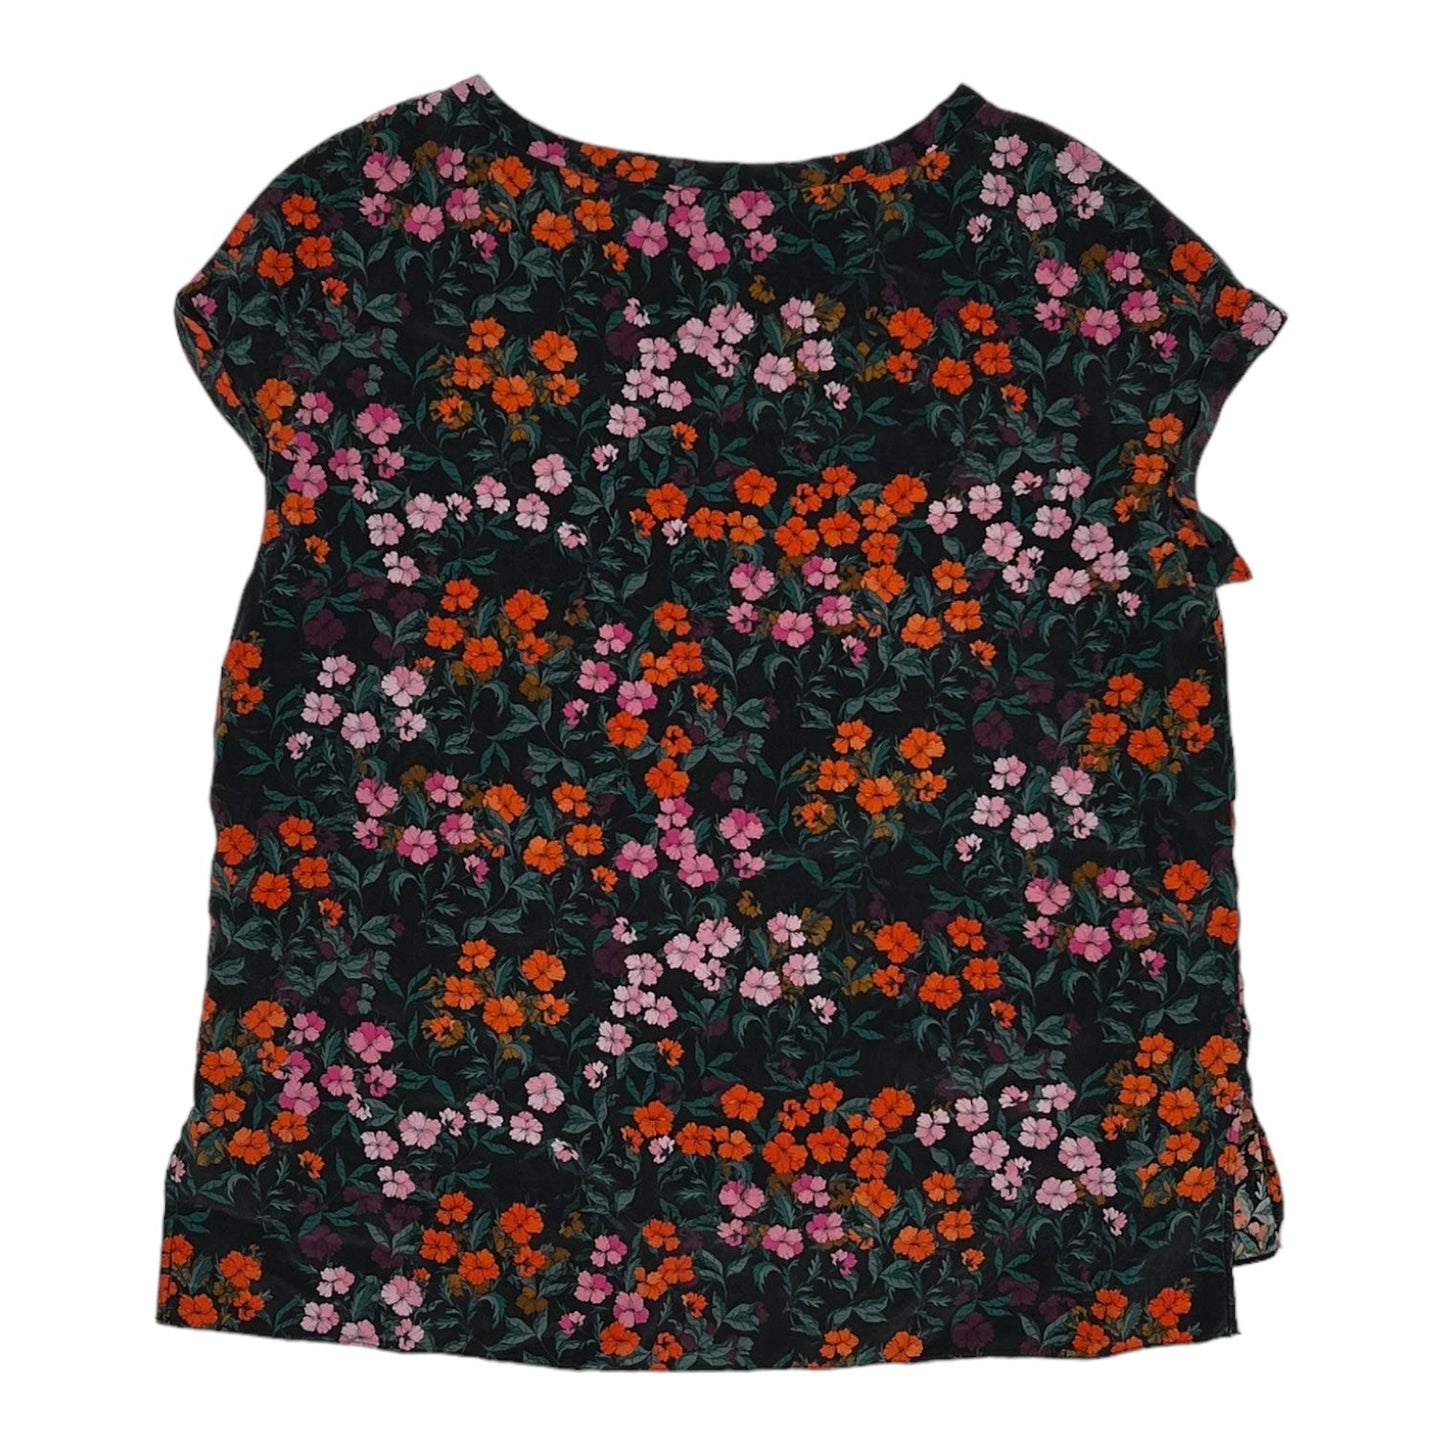 FLORAL PRINT TOP SS by BANANA REPUBLIC Size:S